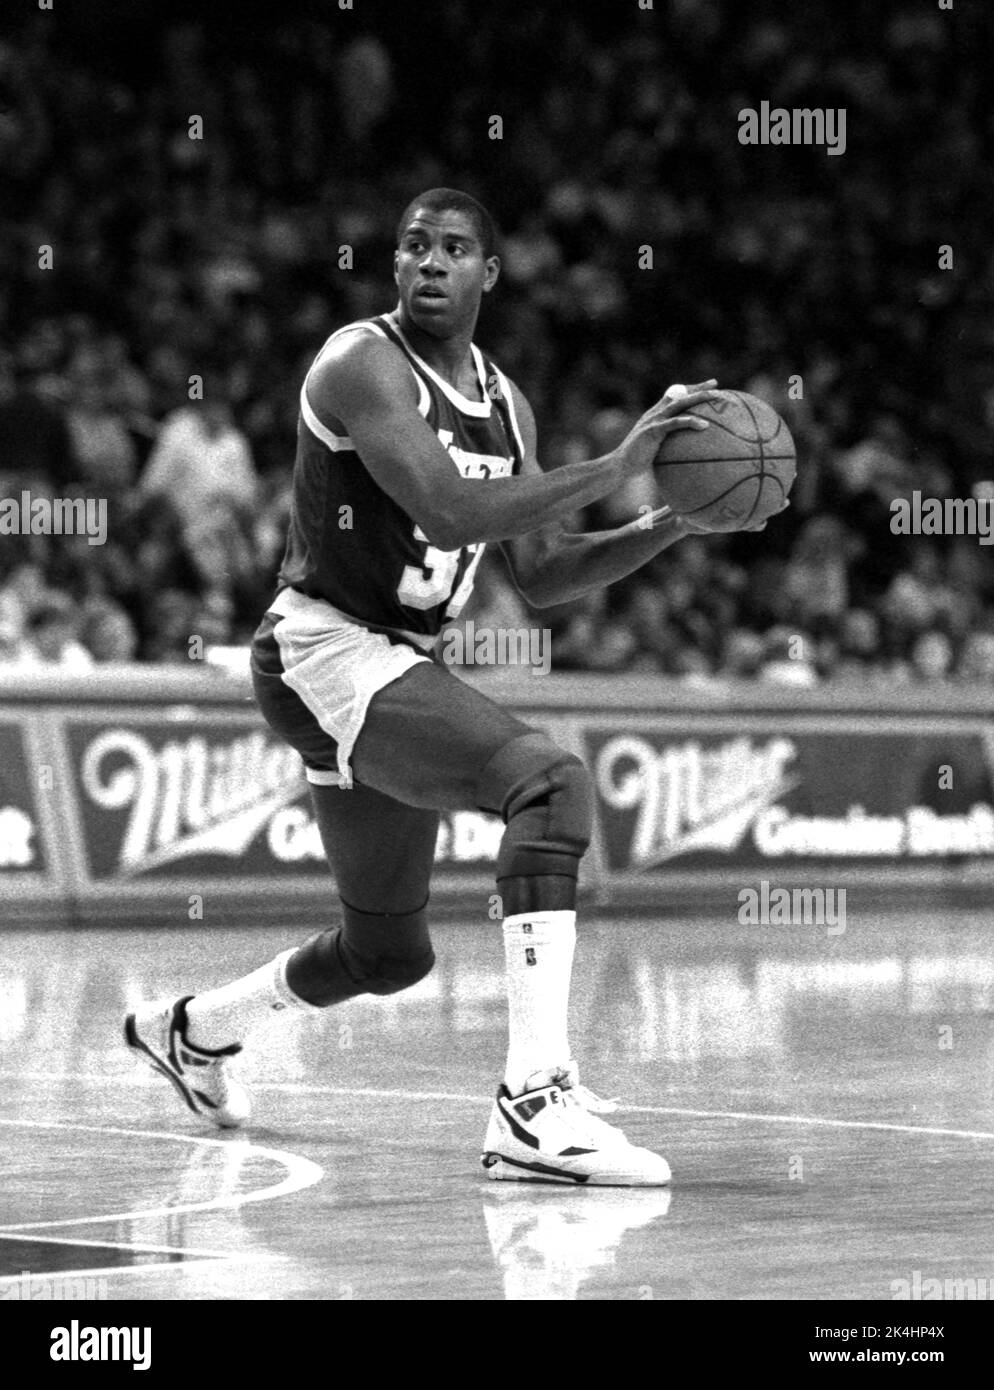 NBA superstar Ervin 'Magic' Johnson of the Los Angeles Lakers brings the ball up during a game against the Chicago Bulls in the 1980s. Stock Photo